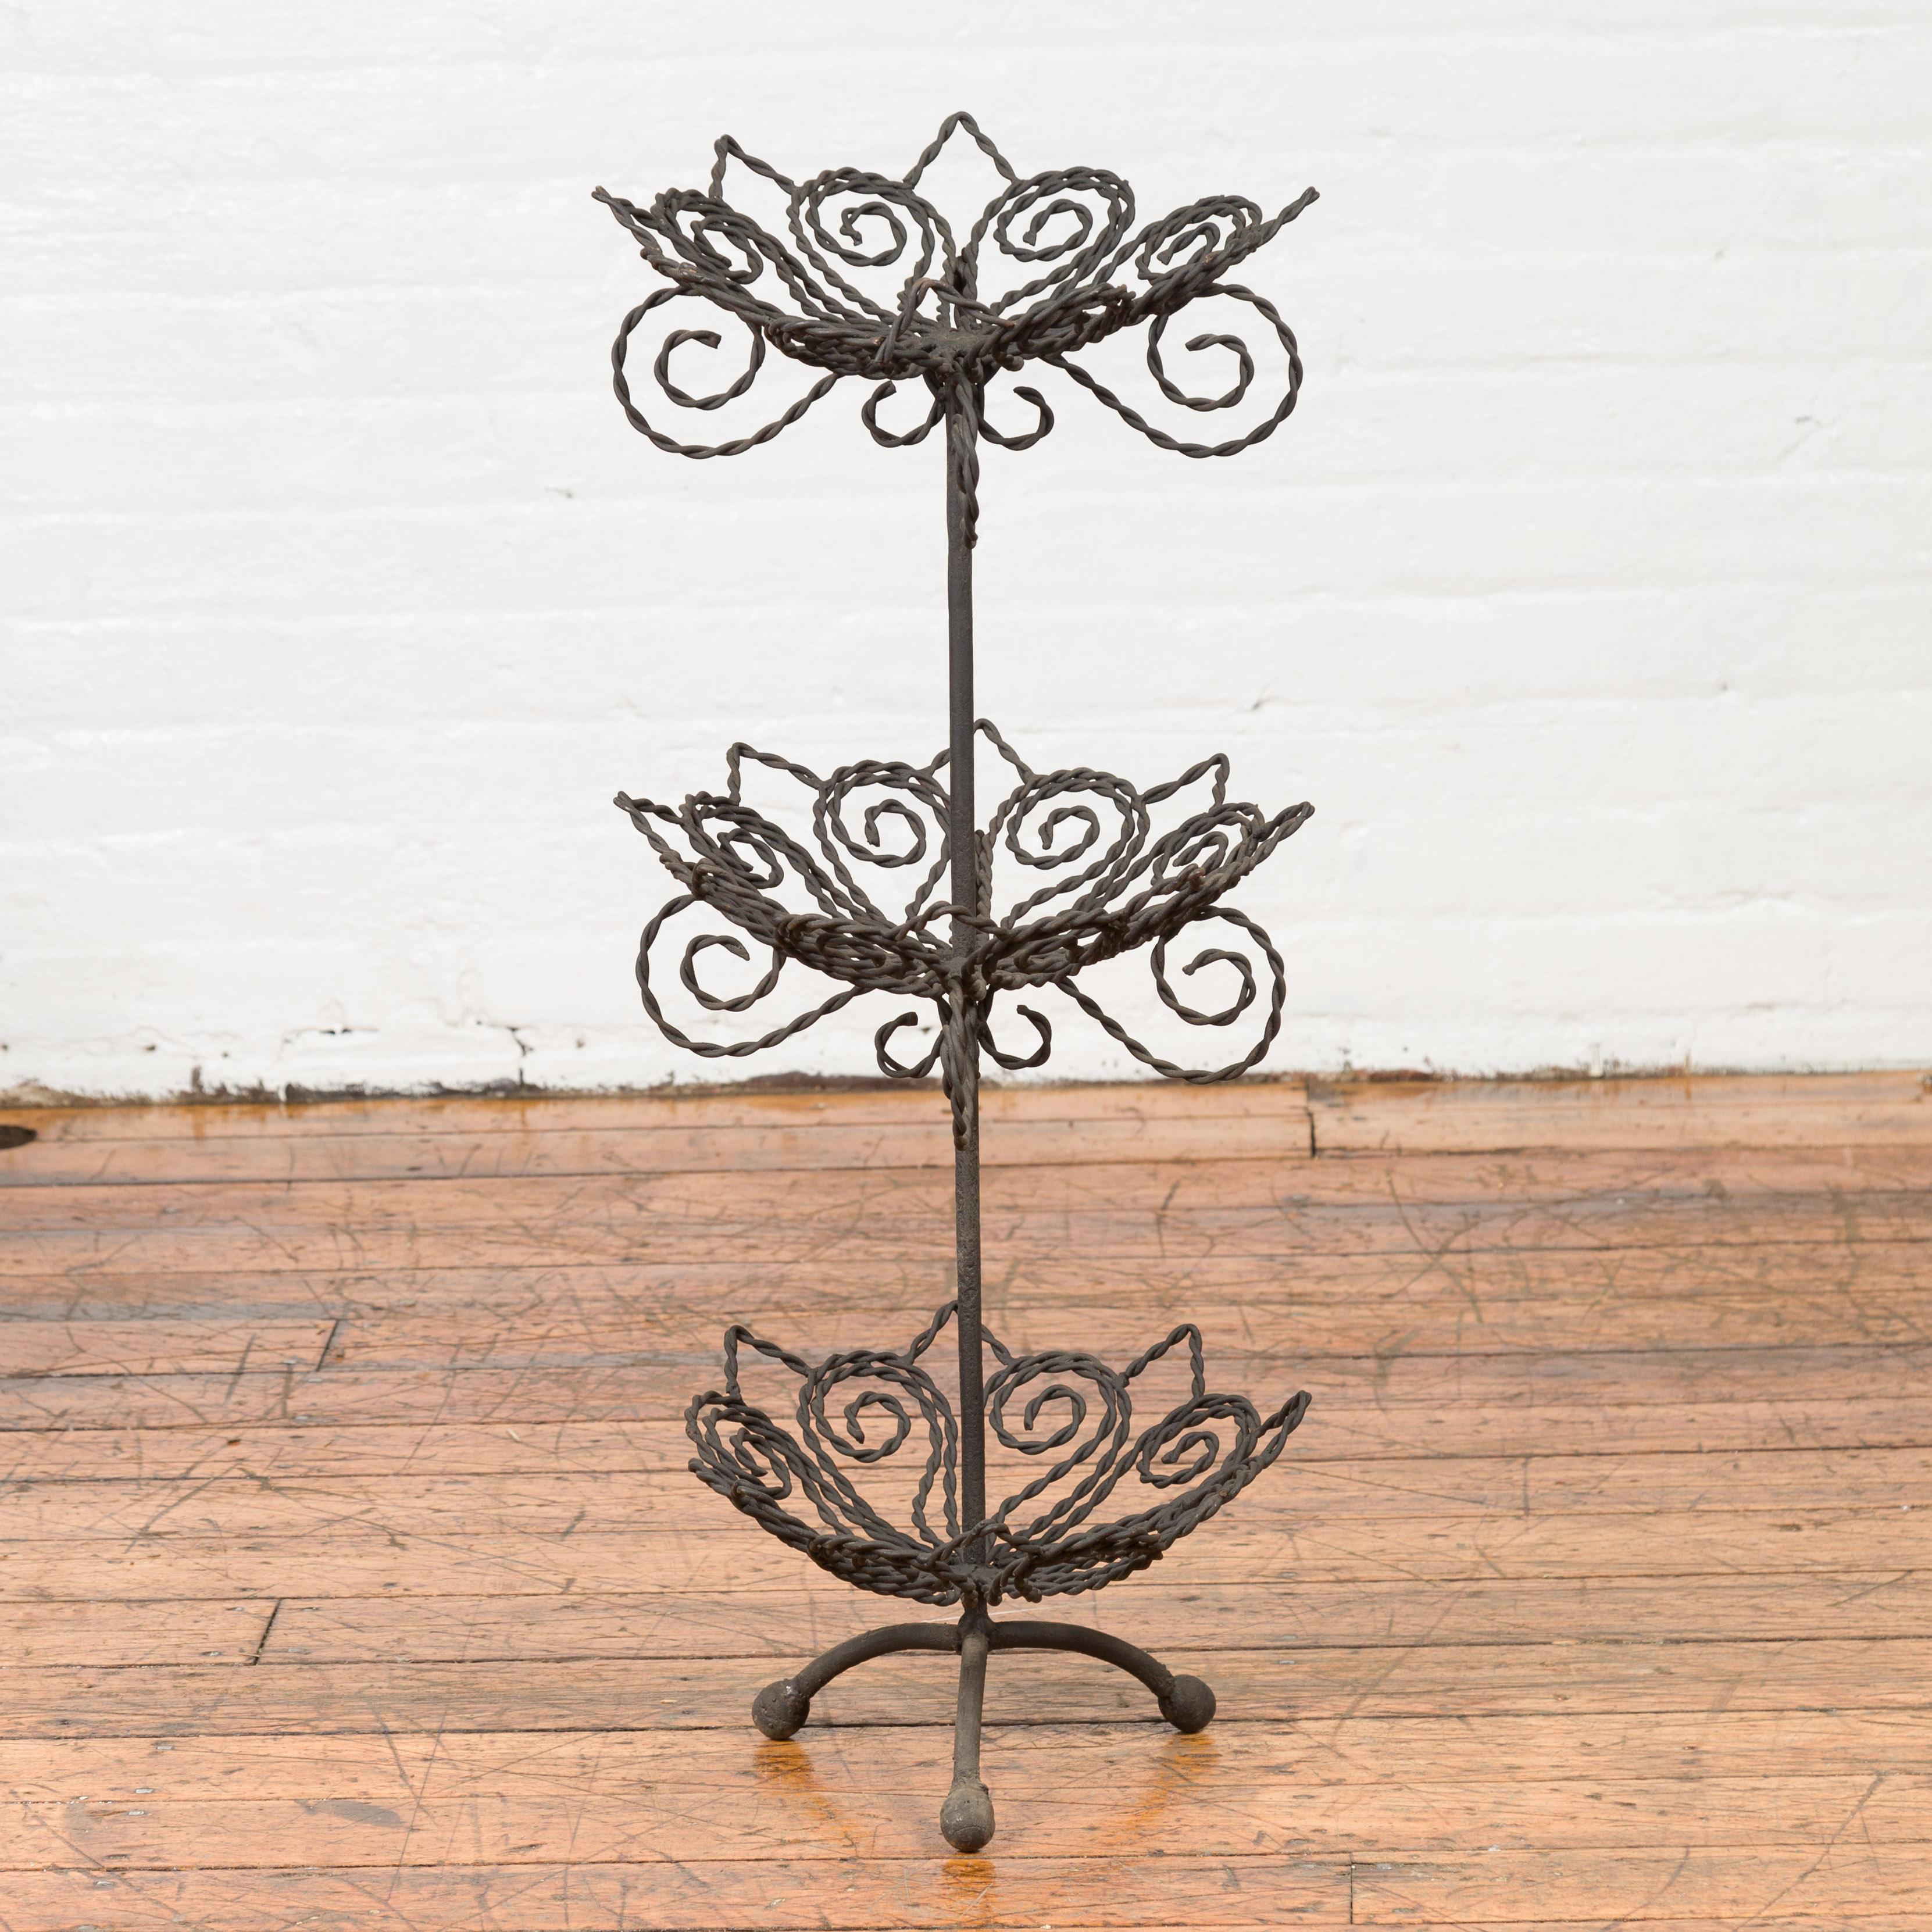 A vintage bronze three-tiered stand from the mid-20th century, with scrolled motifs. Created with the traditional technique of the lost-wax (à la cire perdue) that allows a great precision and finesse in the details, this tiered stand features three